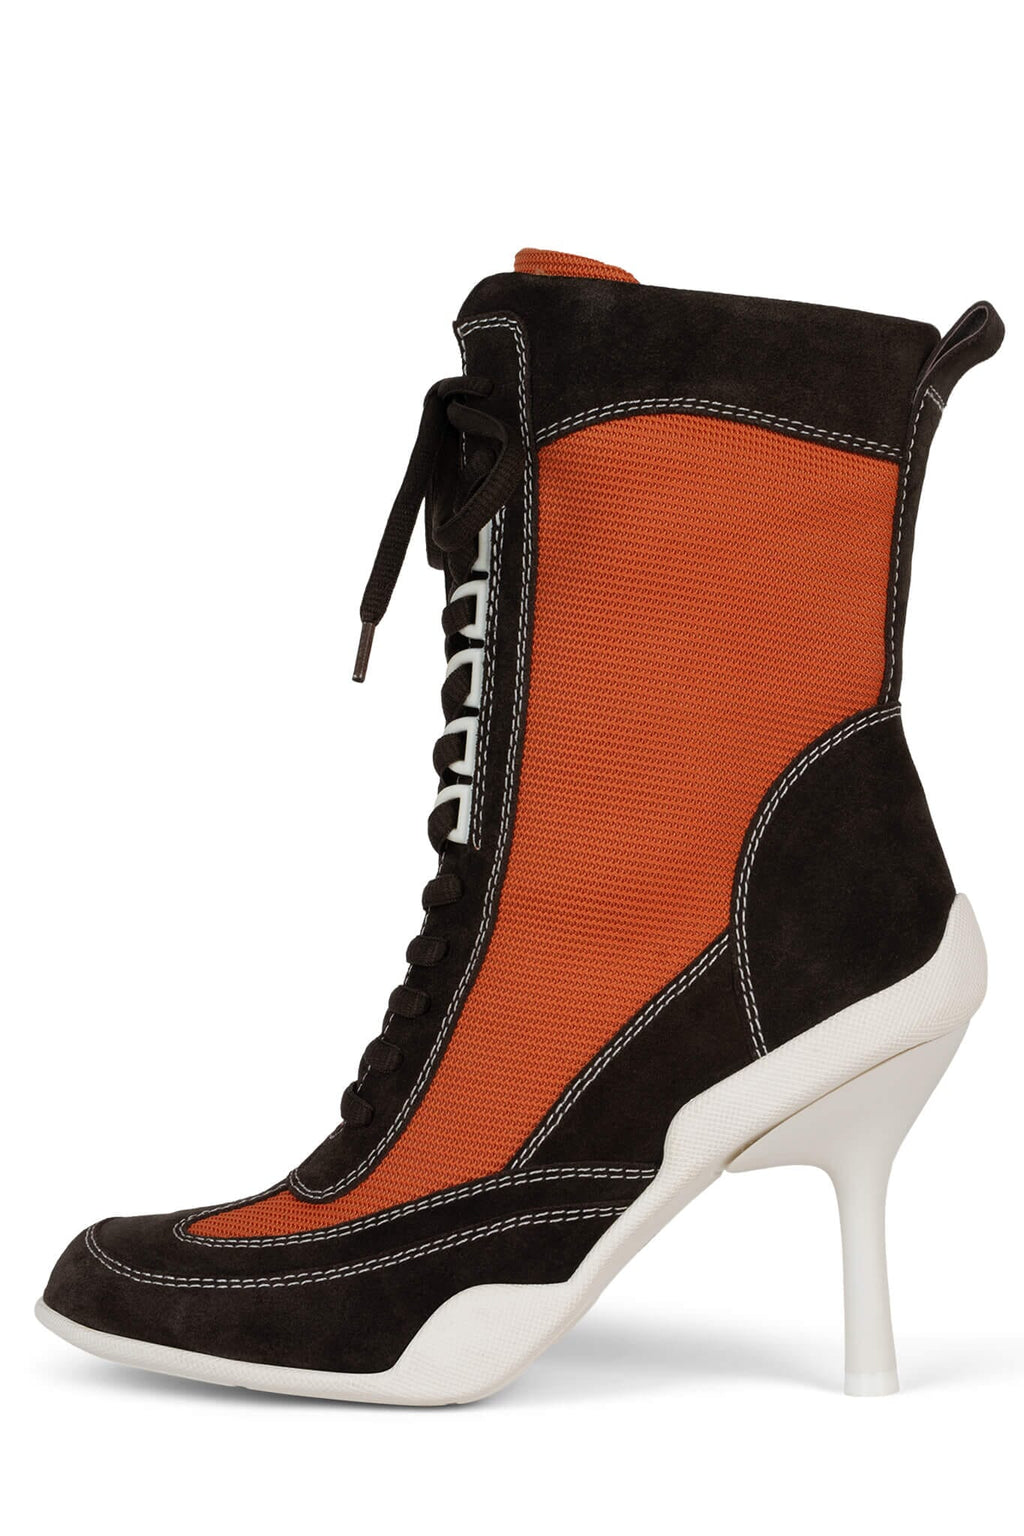 OUT-BOX Jeffrey Campbell Heeled Booties Brown Suede Orange Combo